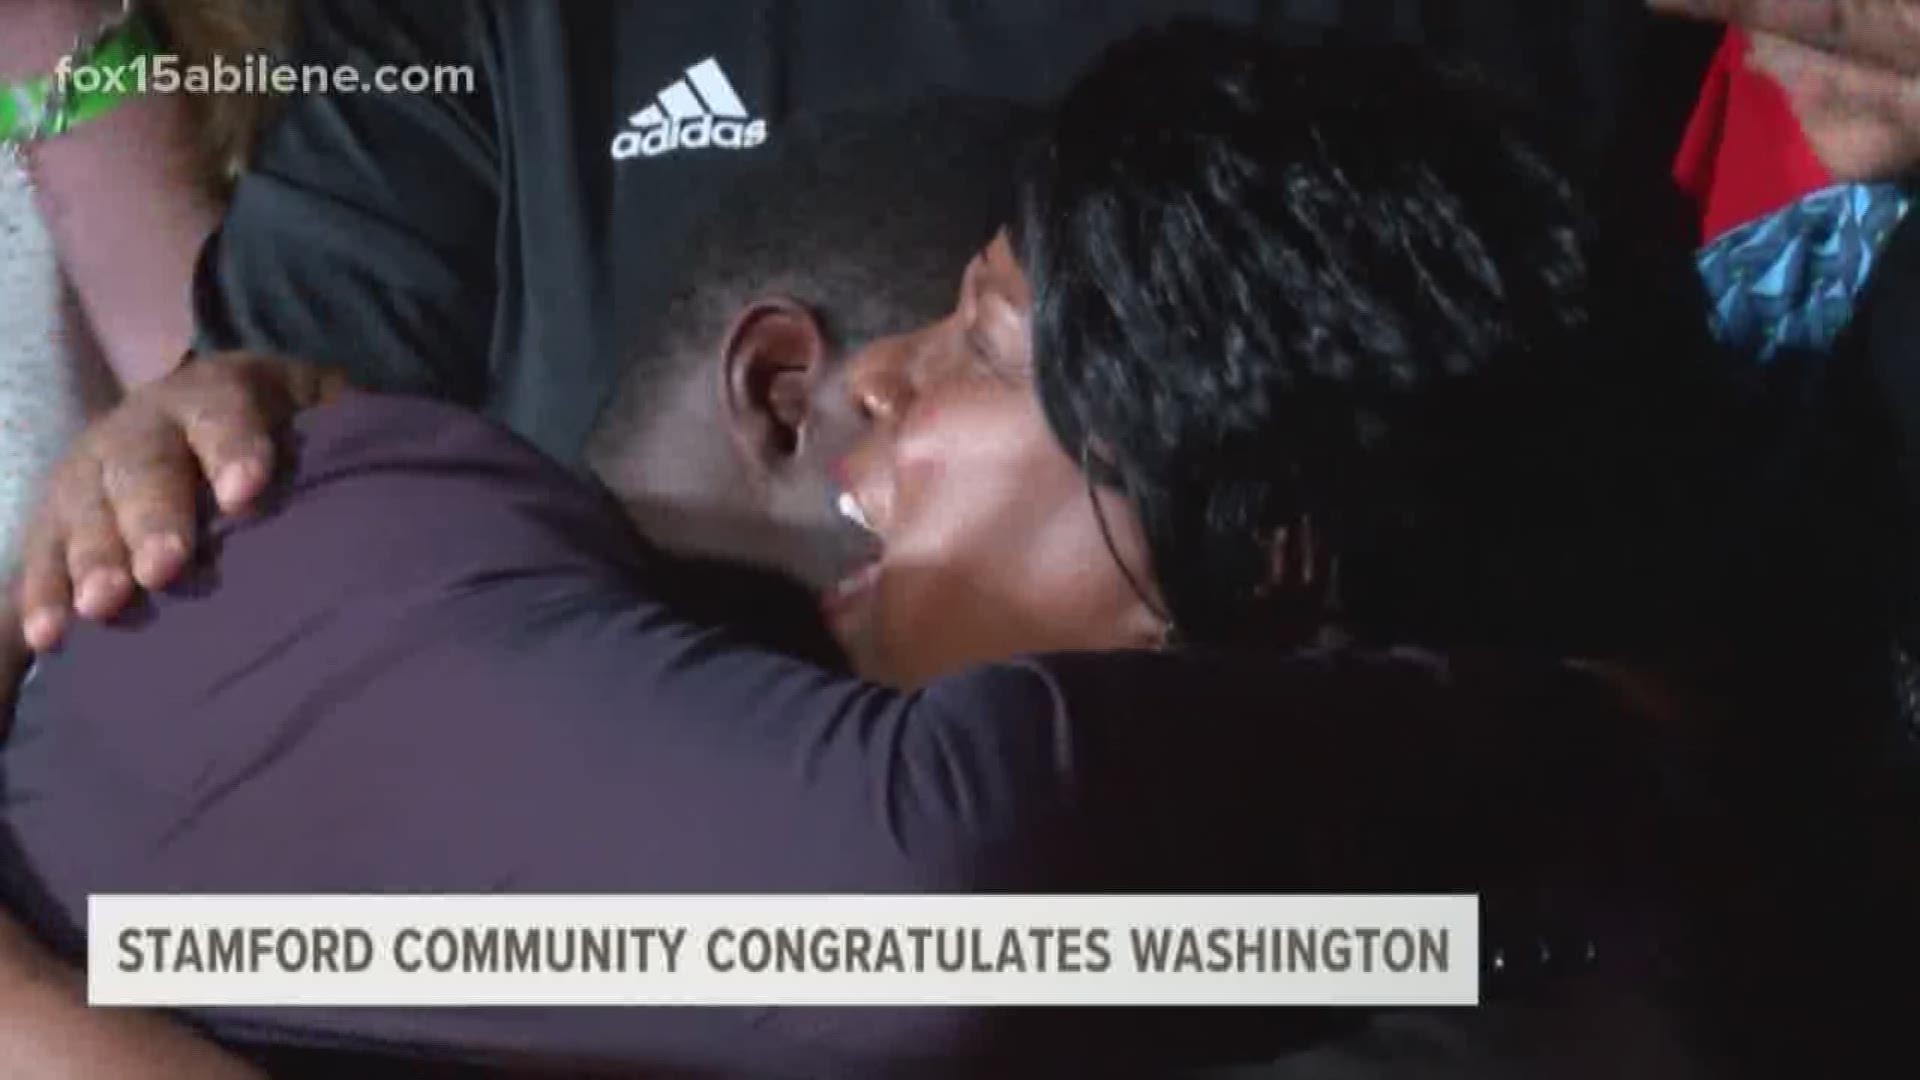 Stamford's own James Washington got the call he always dreamed of last Friday. A call asking him to be a Pittsburgh Steeler. Several important people have come into his life that wanted to congratulate Washington. 